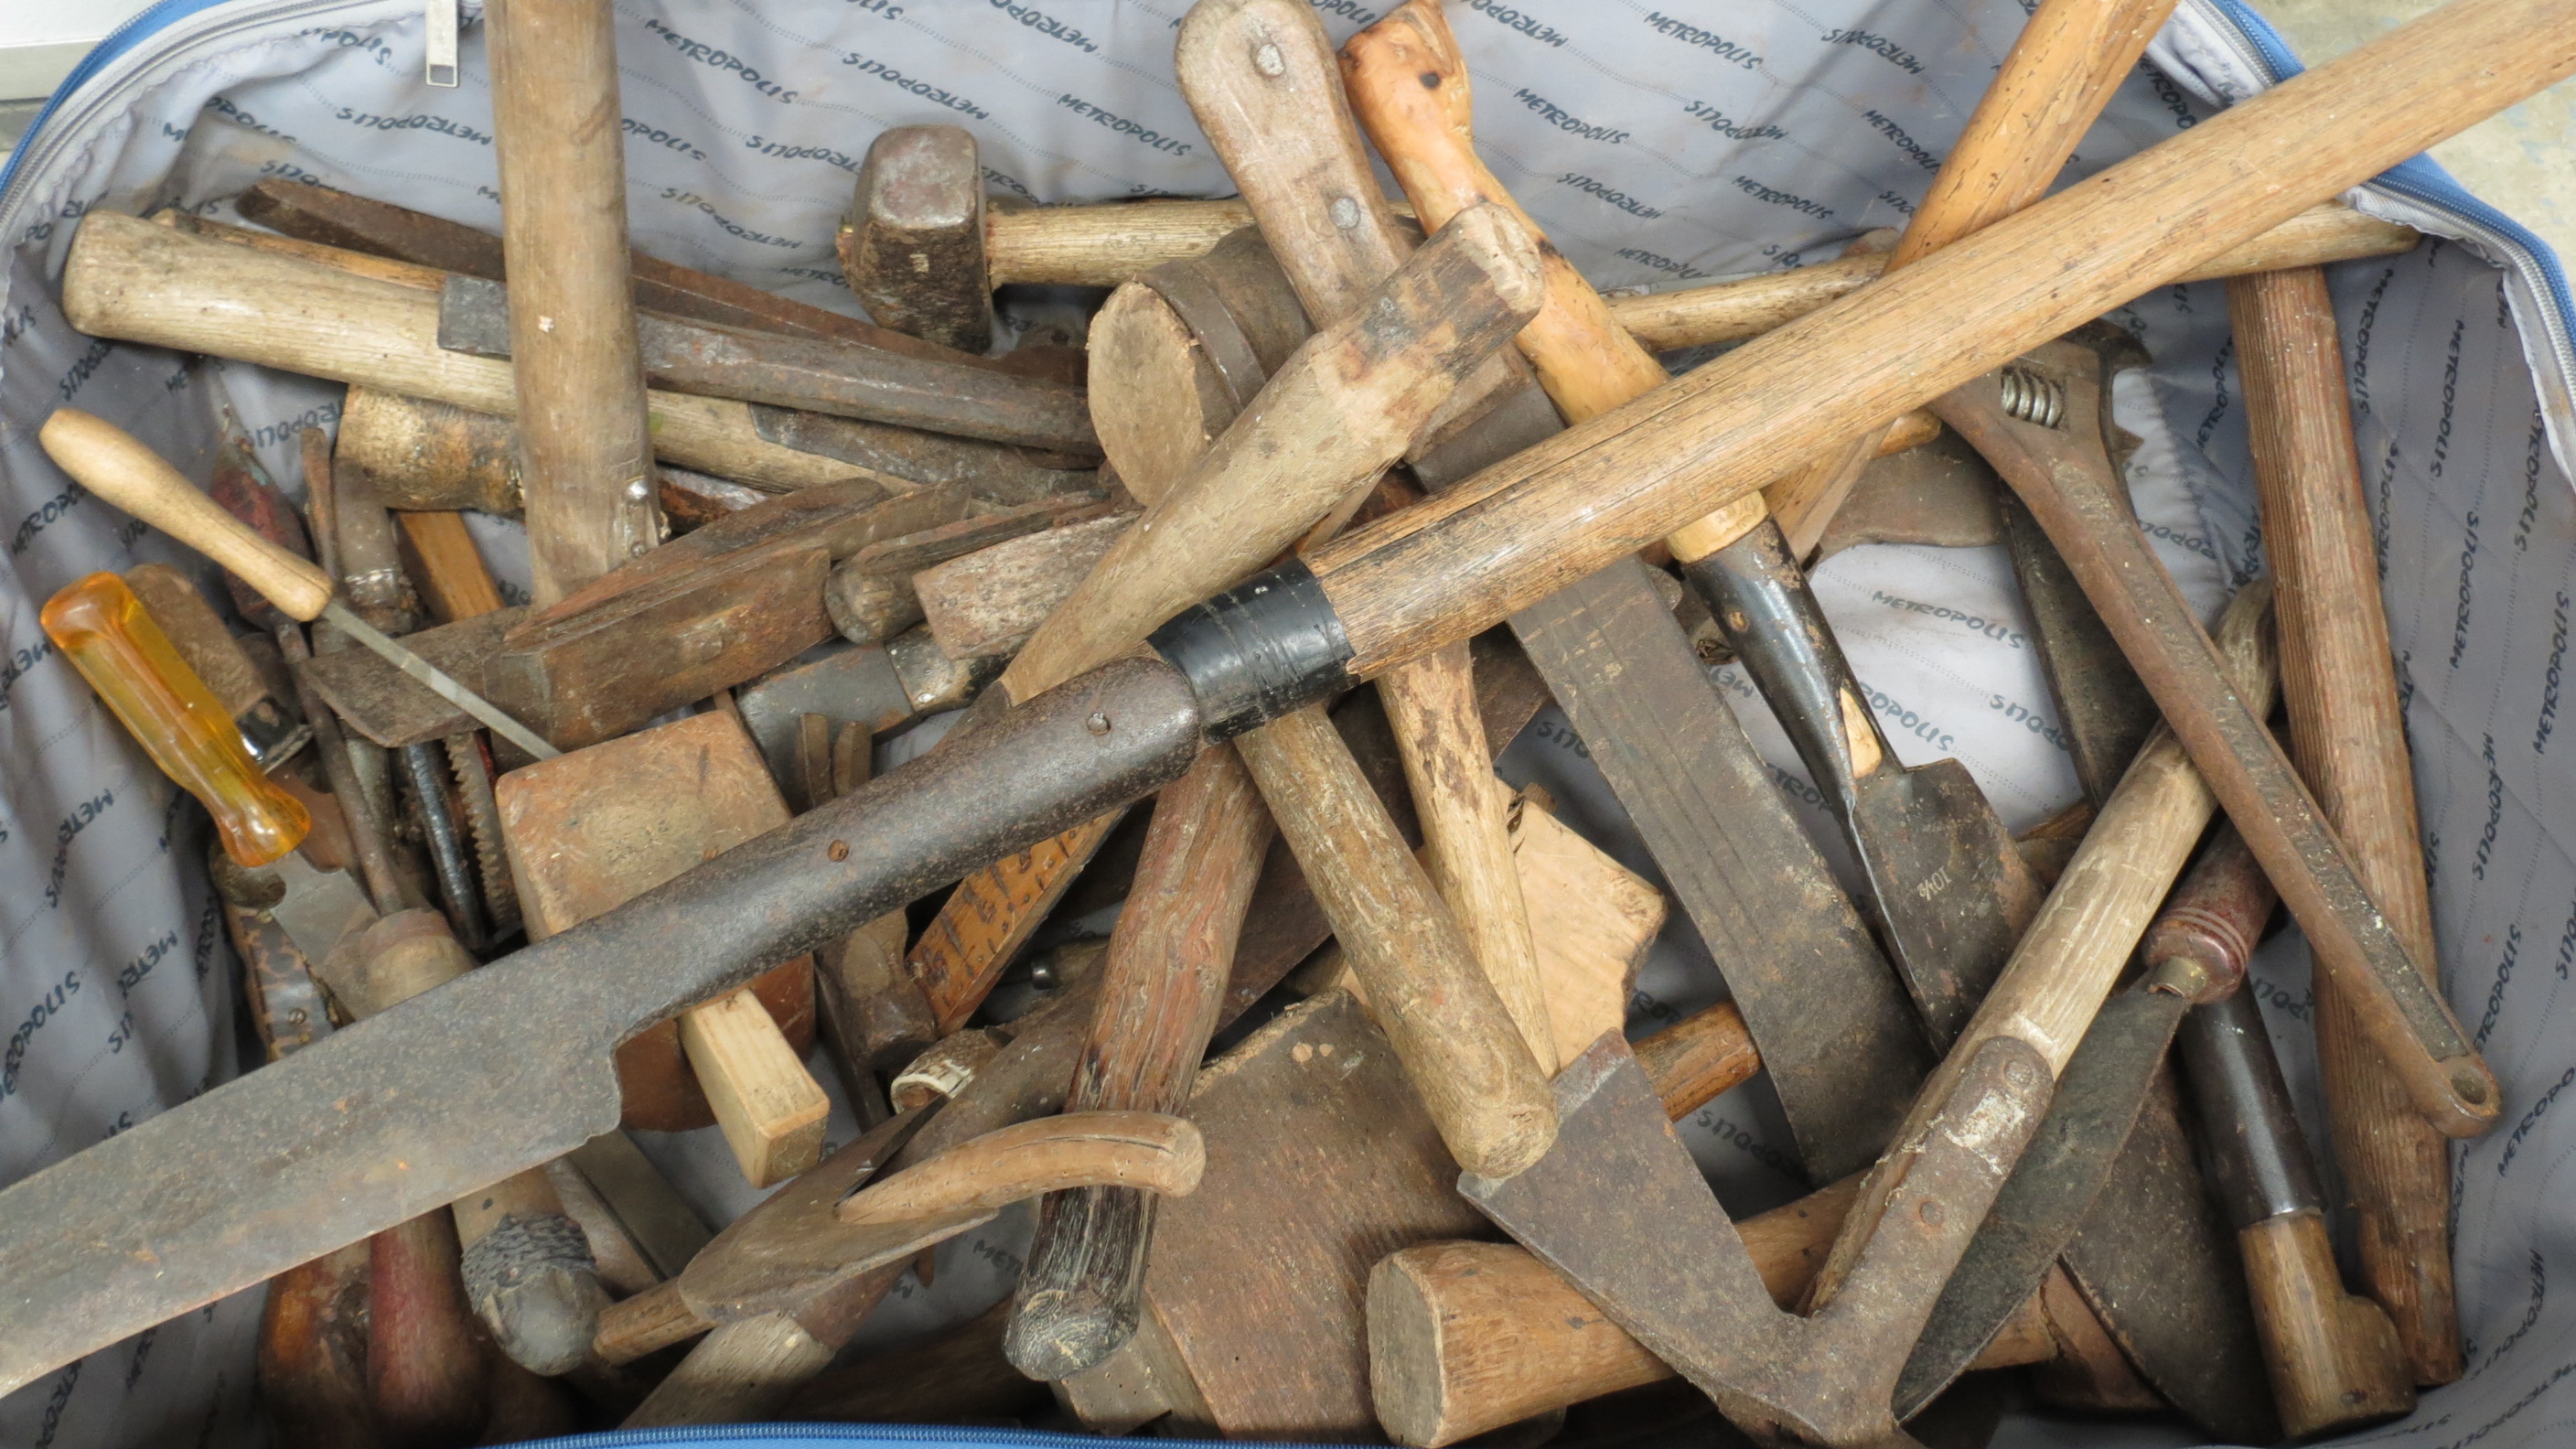 A quantity of tools including hatchets and axes.